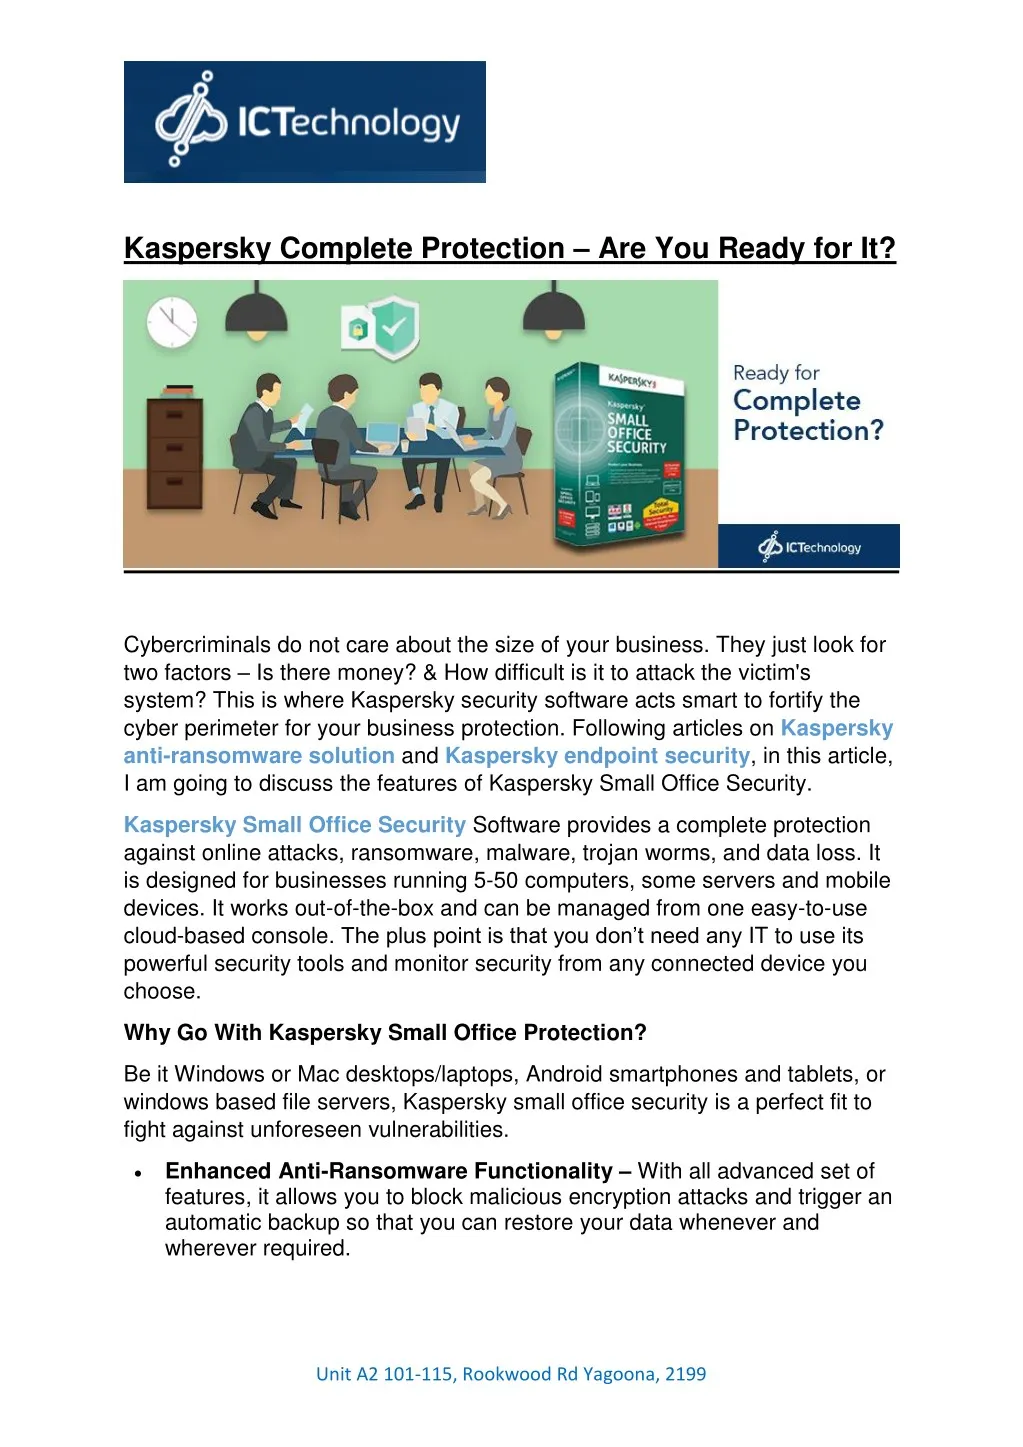 kaspersky complete protection are you ready for it